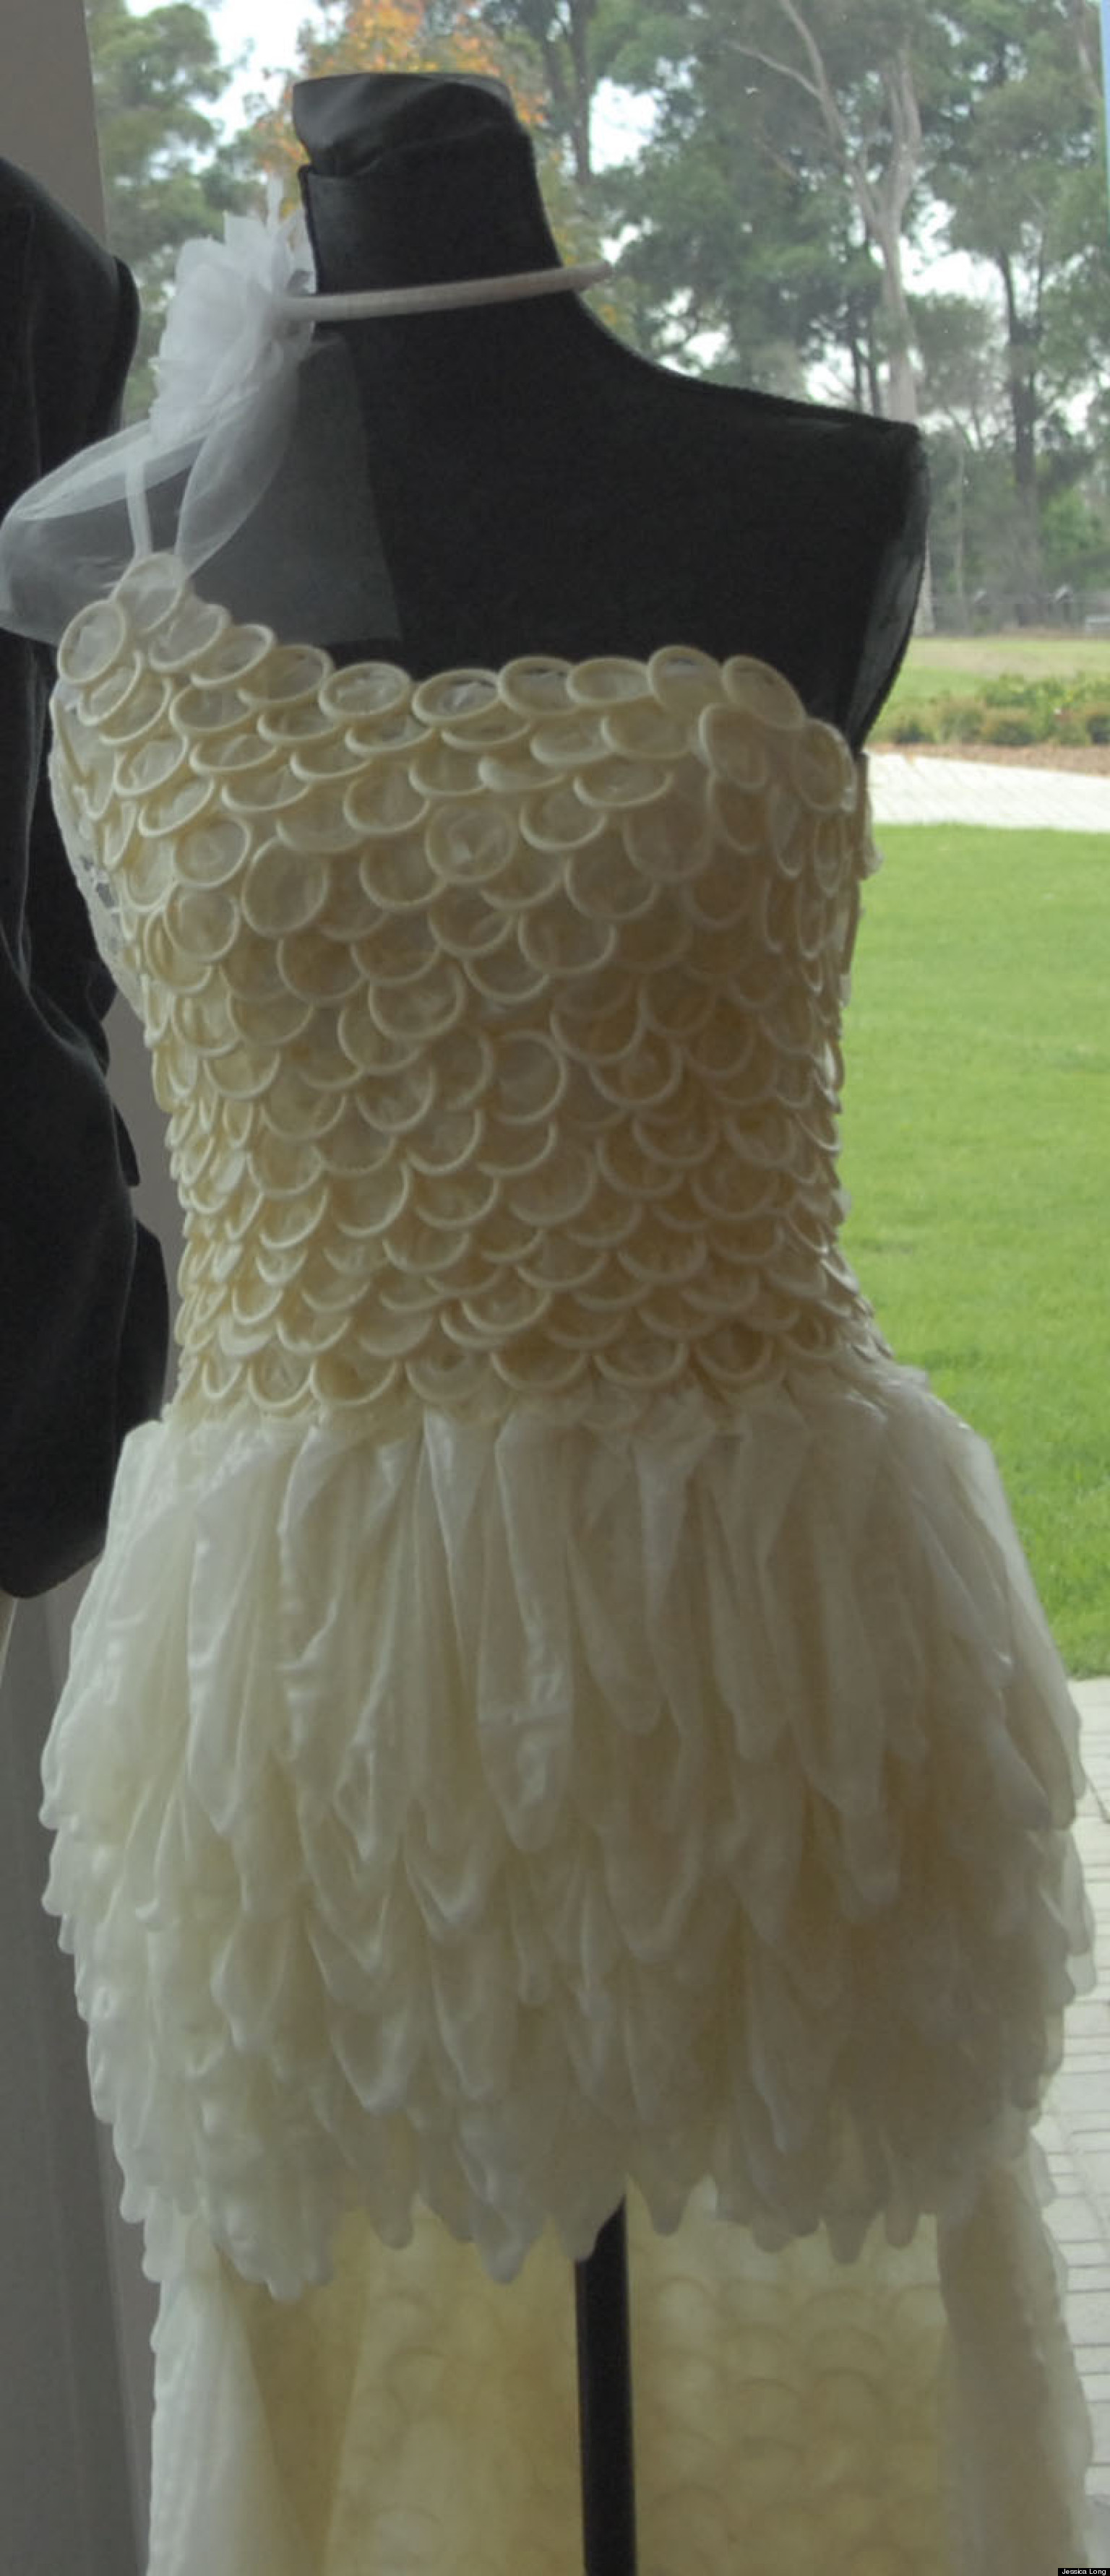 Condom Dress Wedding Gown Created For Chlamydia Awareness